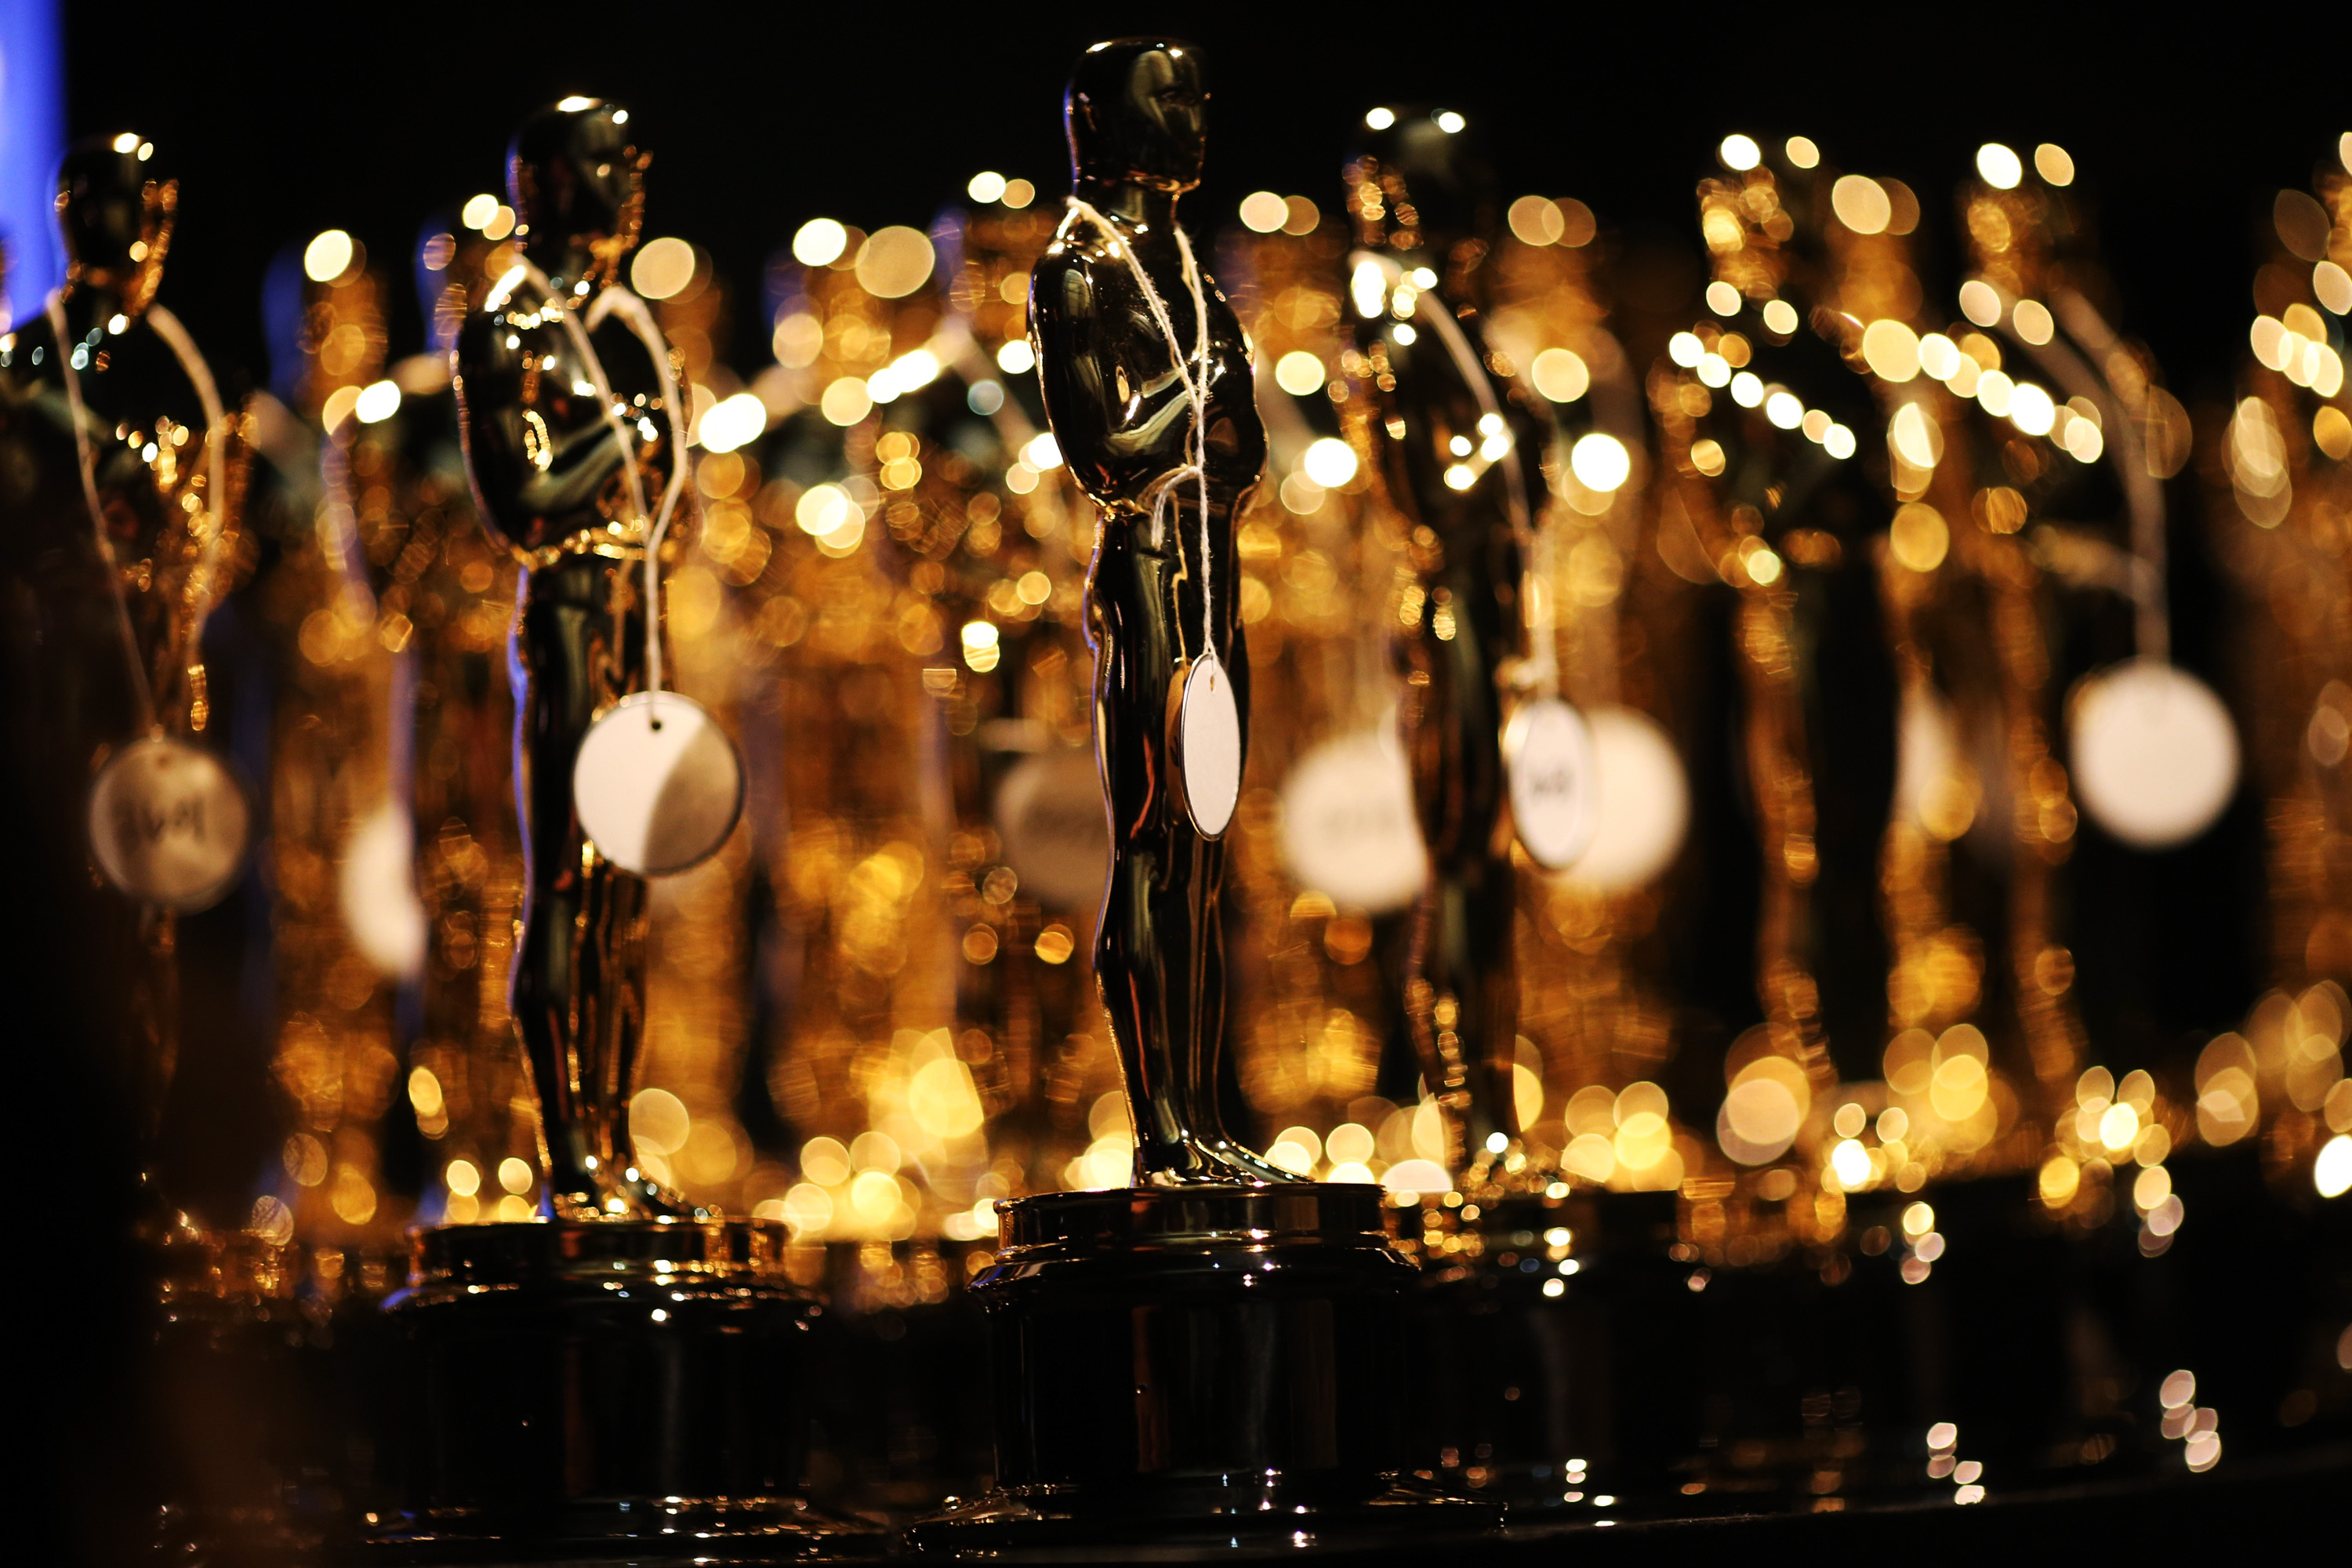 ceremony shows that the Academy Awards are antiquated